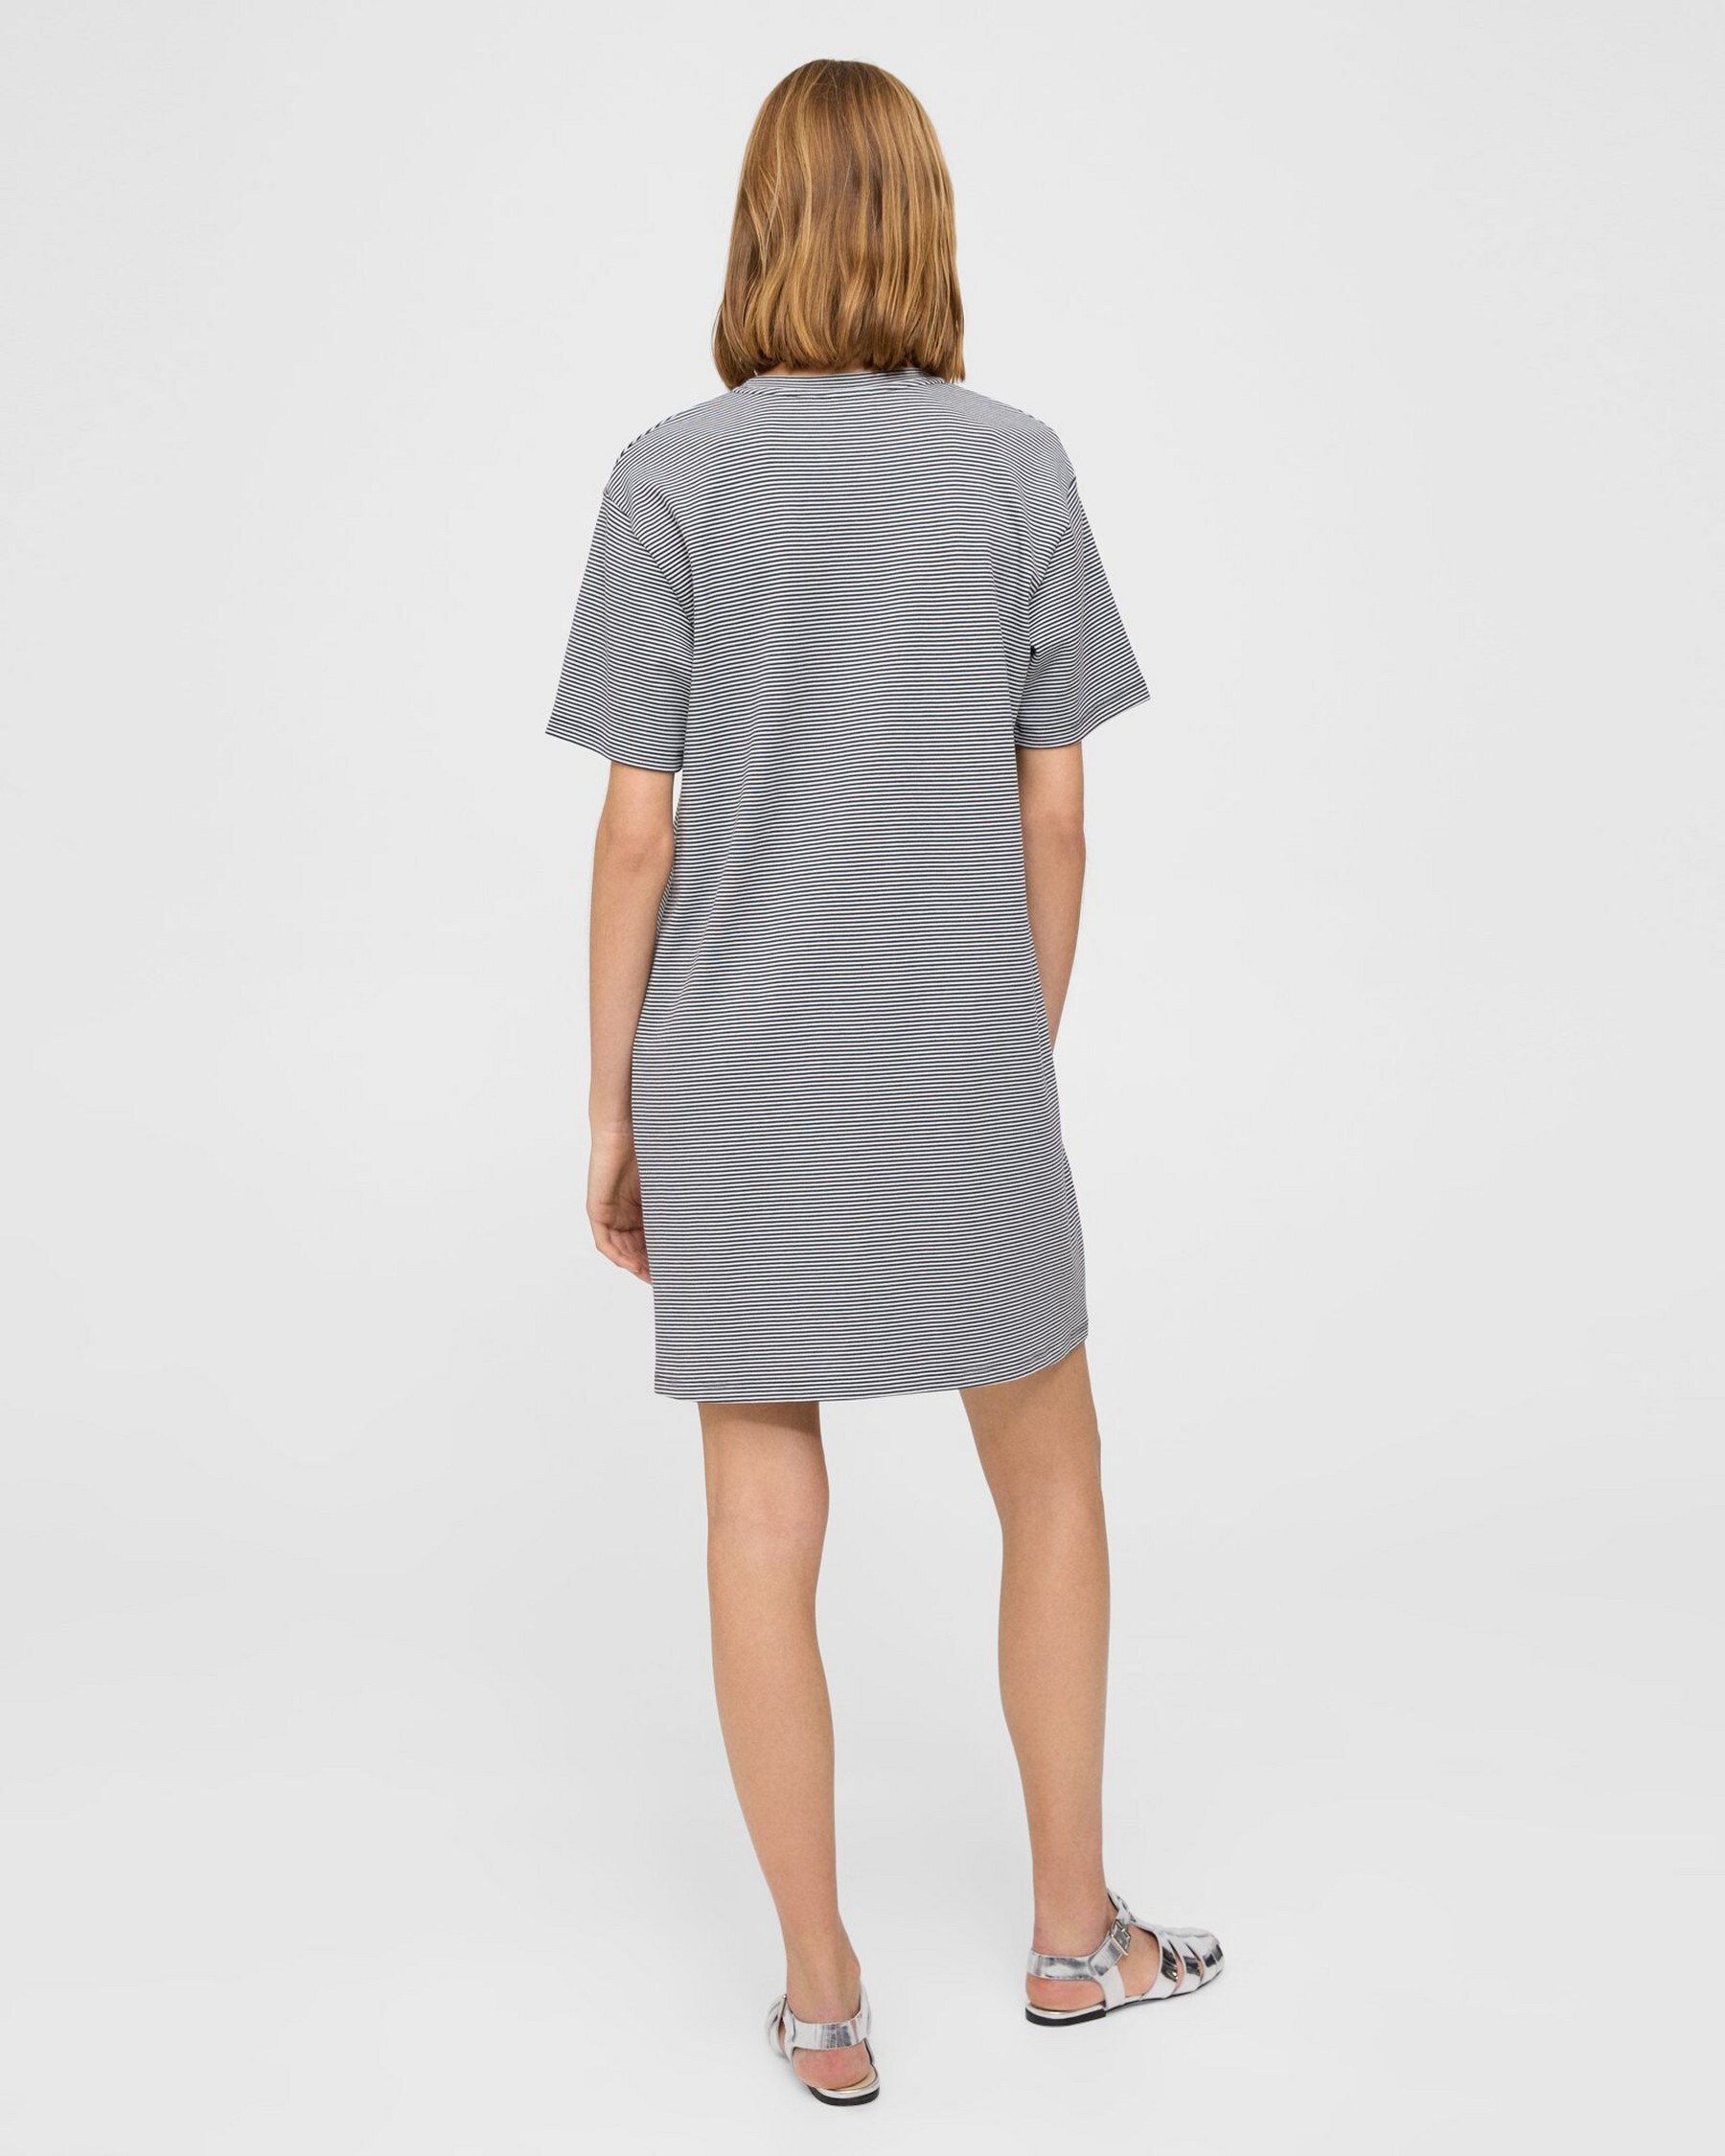 Perfect T-Shirt Dress in Striped Cotton Jersey